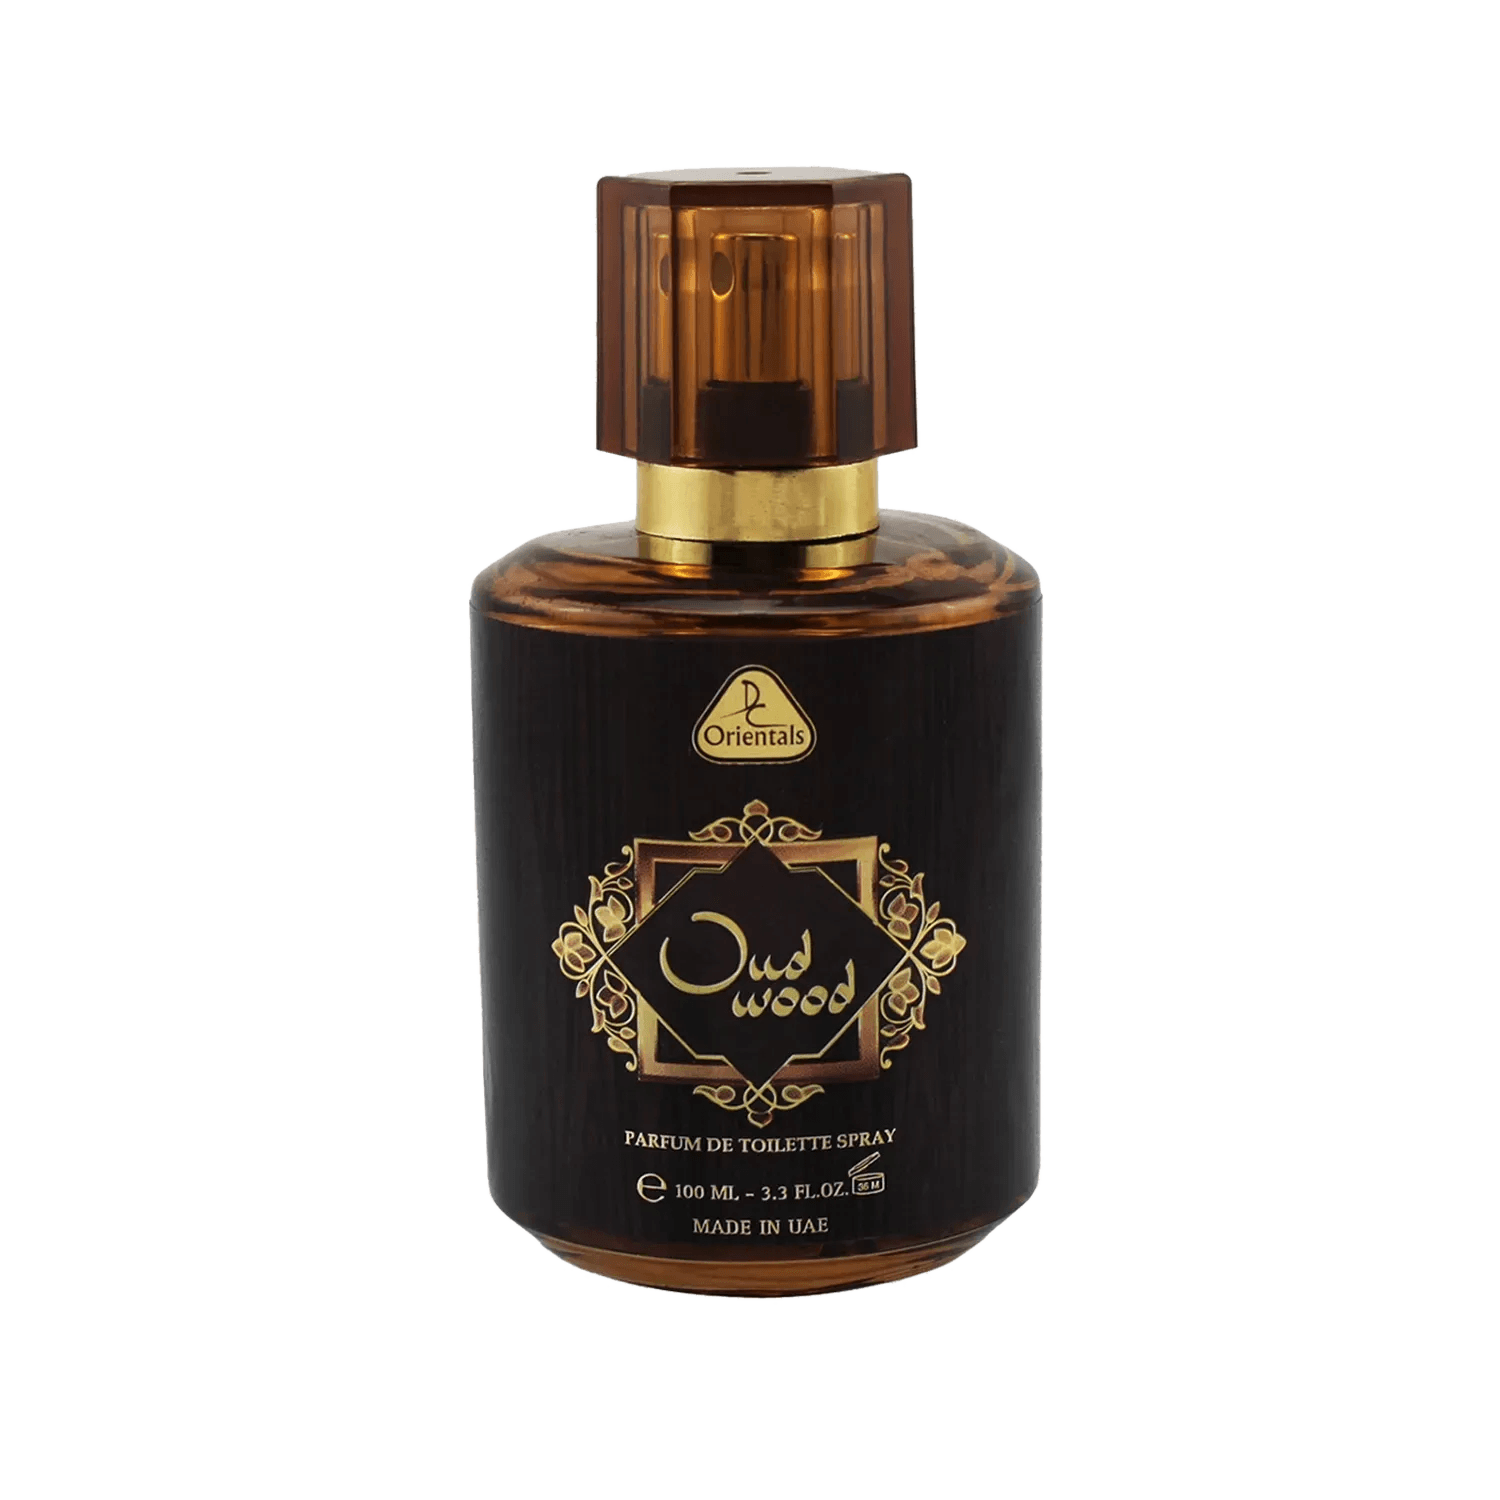 Dorall Collection | Dorall Collection Orientals Oud Wood Perfum de Toilette for Unisex (100ml)